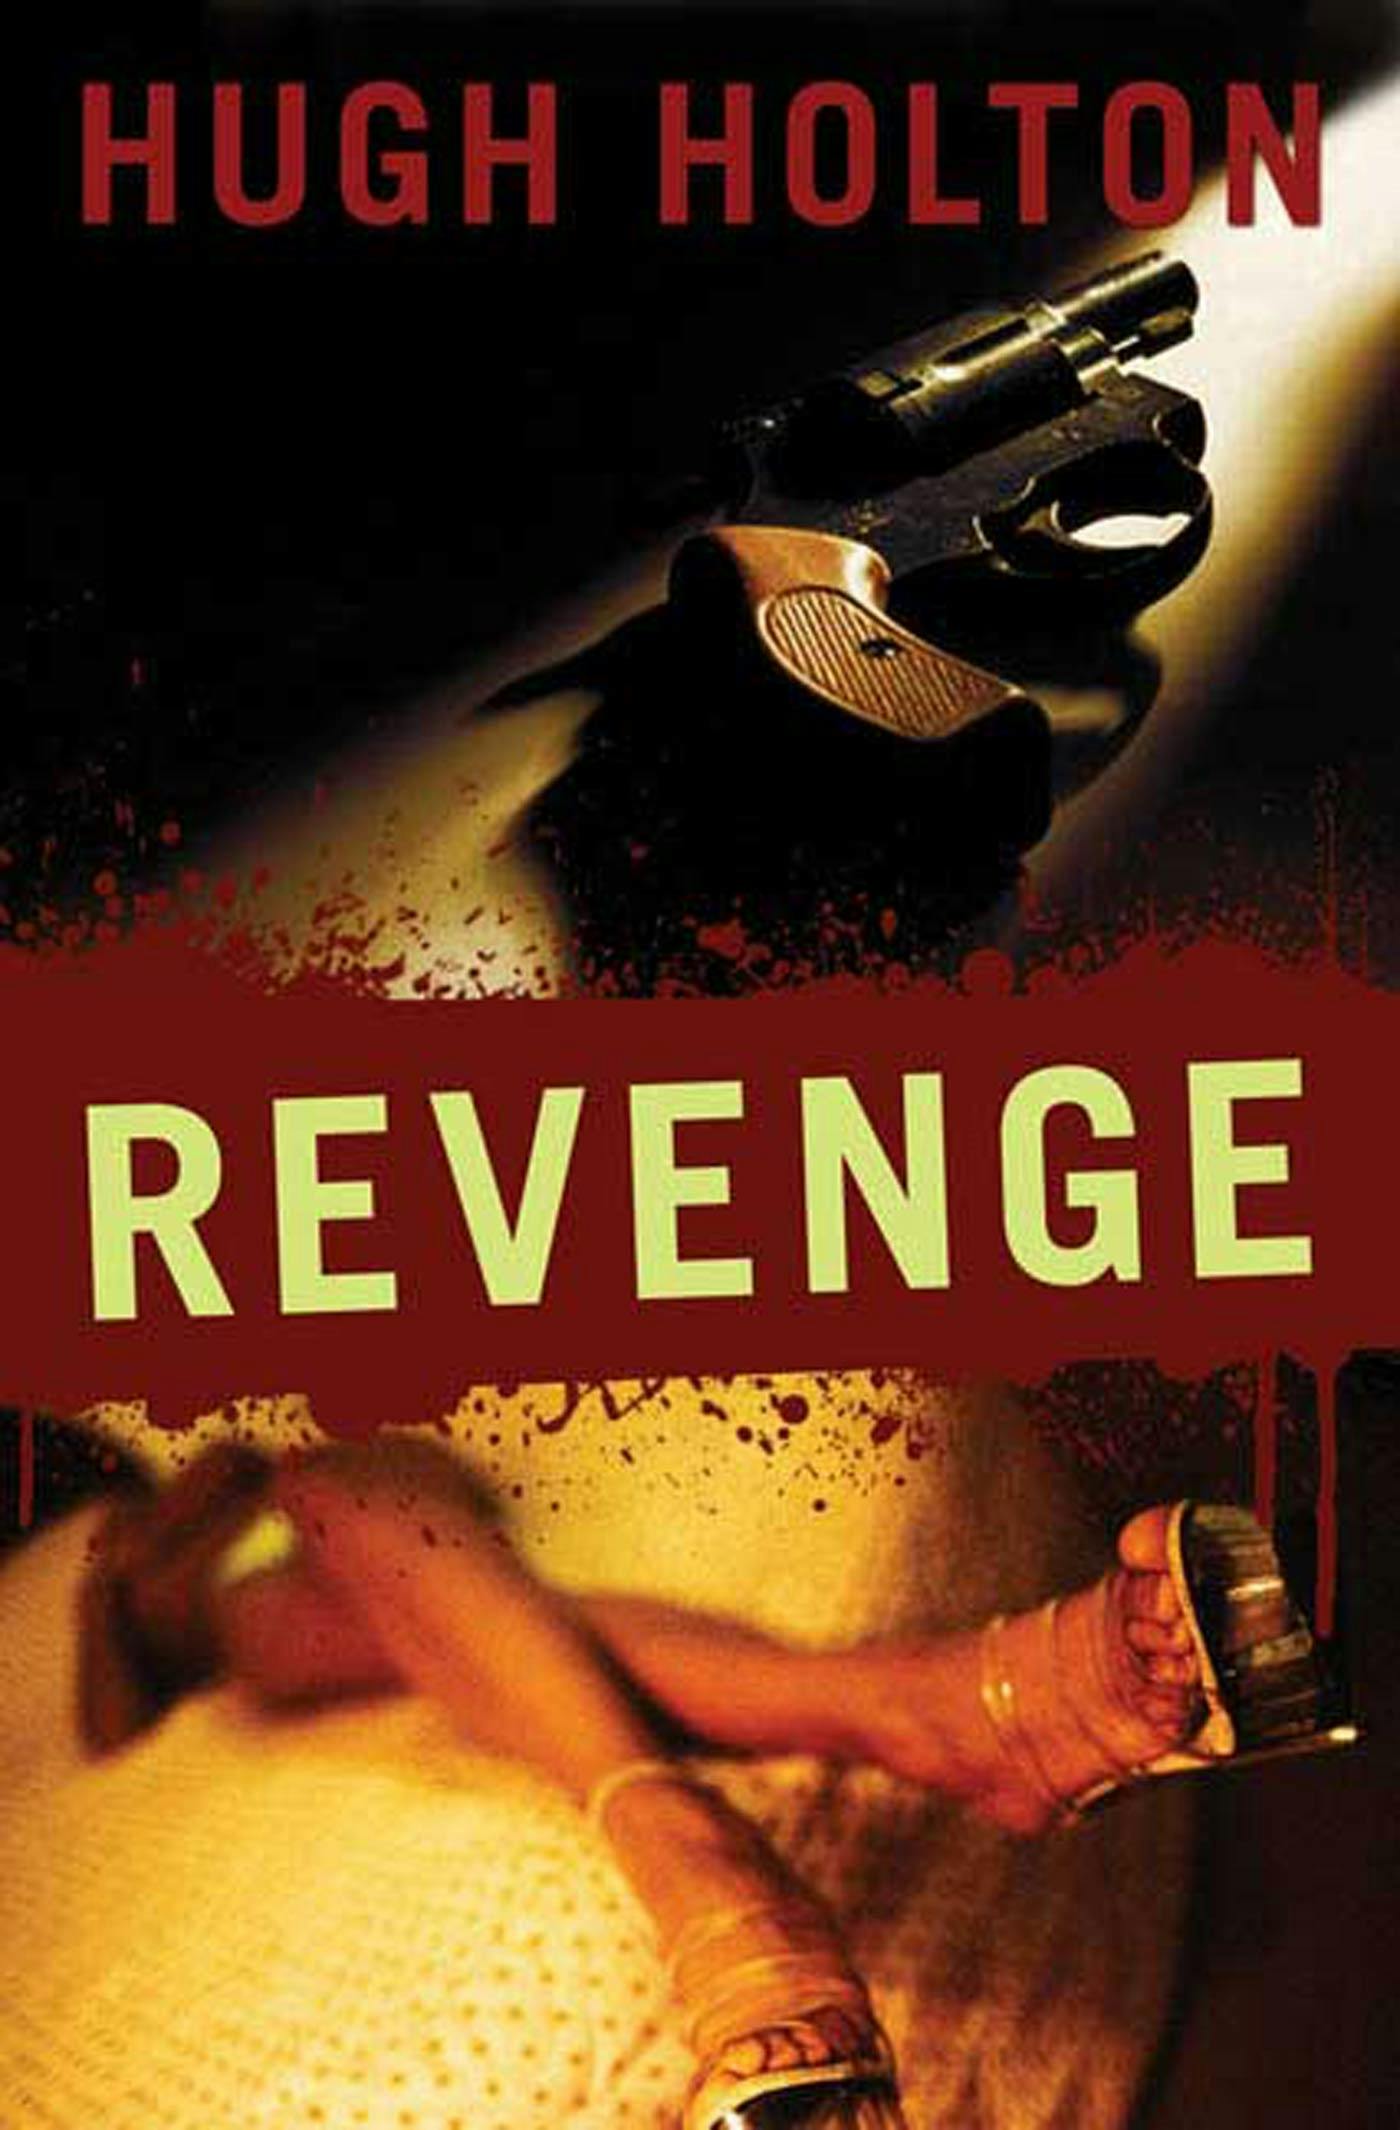 Cover for the book titled as: Revenge